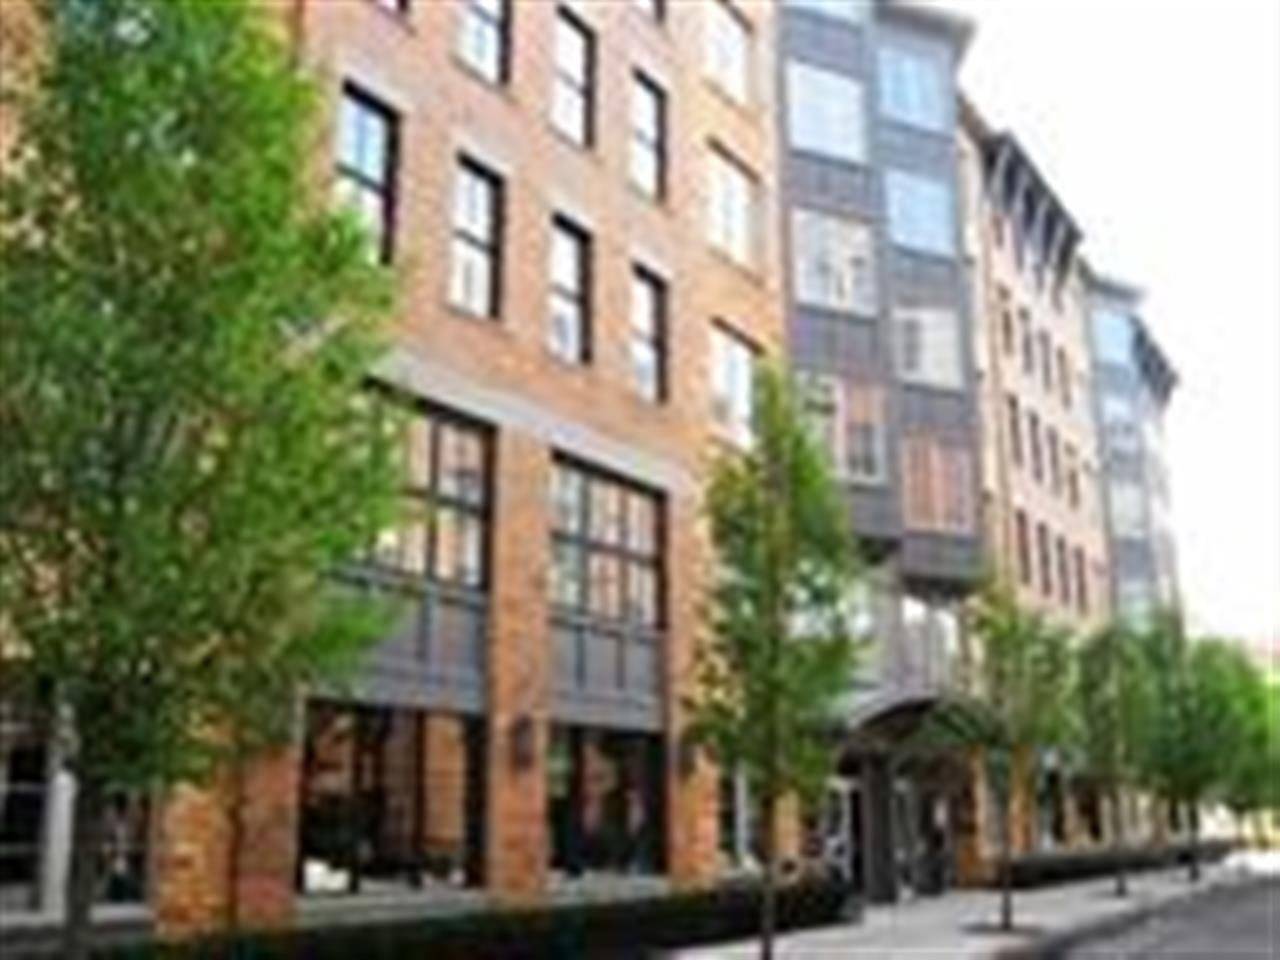 Live in Luxury in this expansive 3bd/2 - 3 BR Hoboken New Jersey